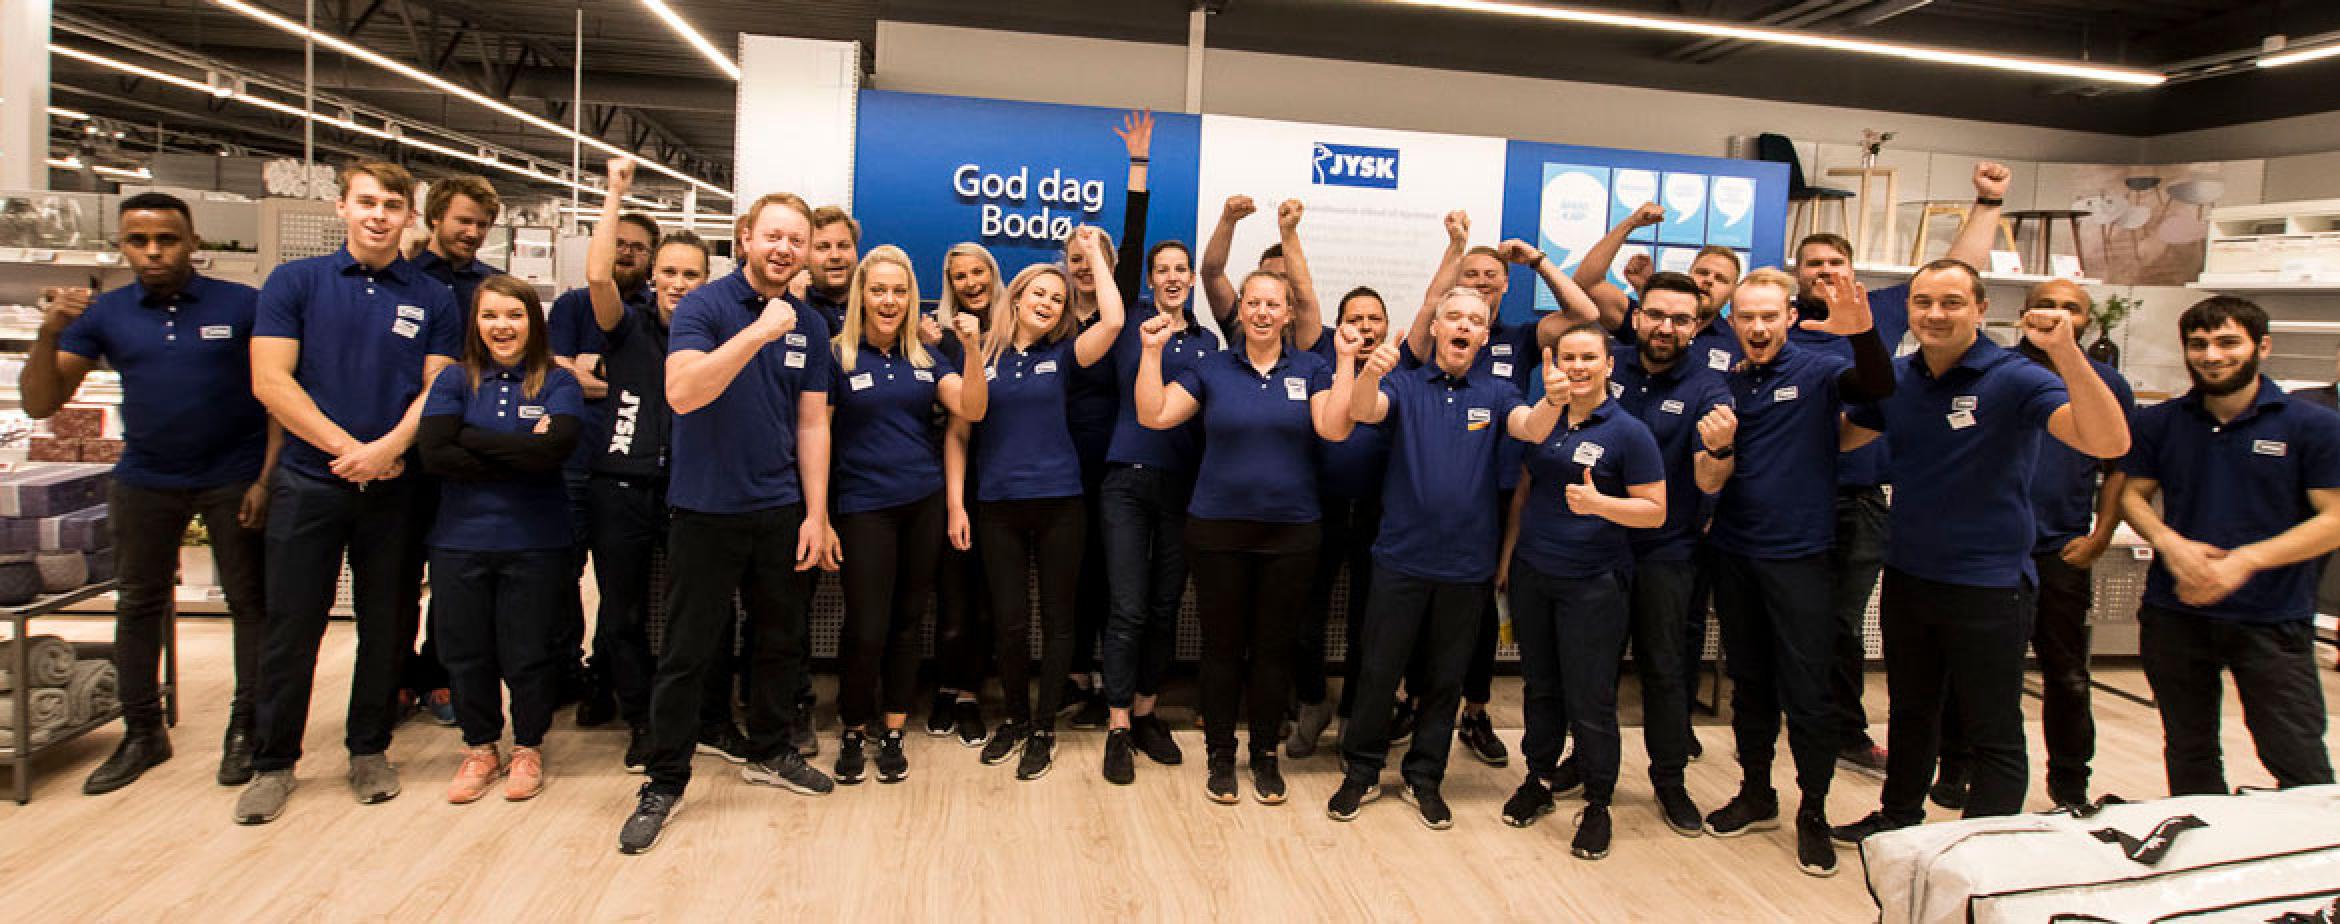 First XL Store in Norway